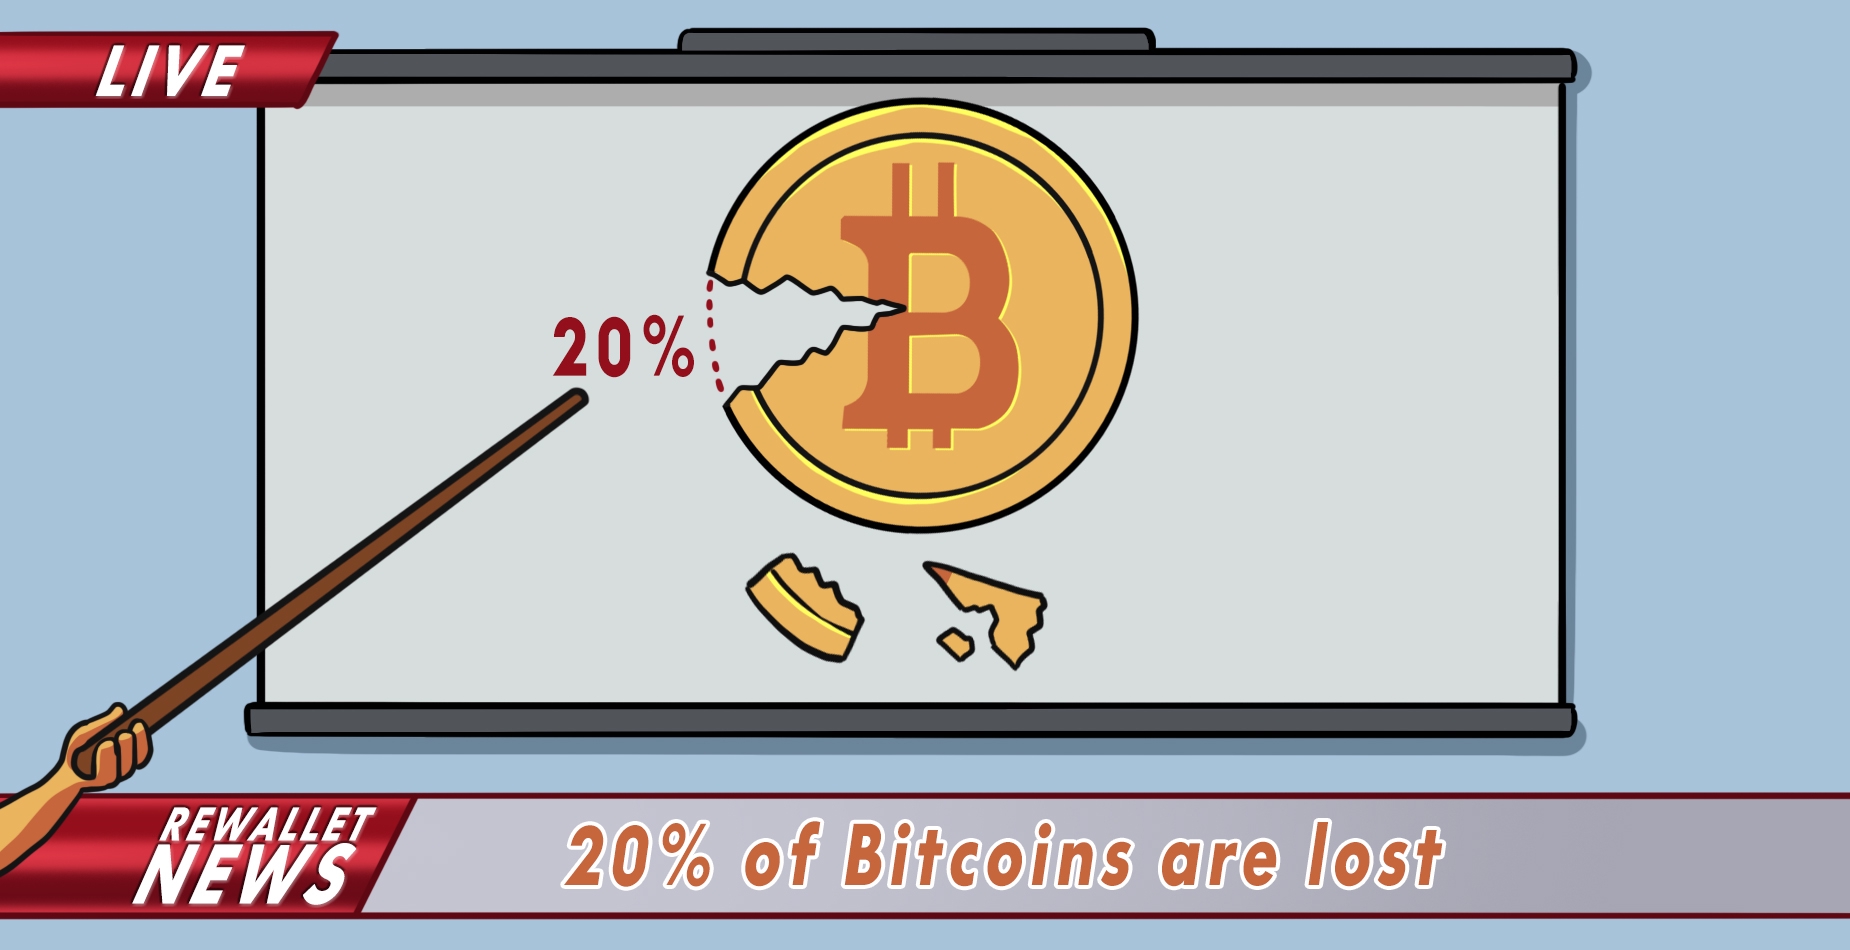 ReWallet News report on lost Bitcoin in 2023 with the headline: "20% of Bitcoins are lost!"